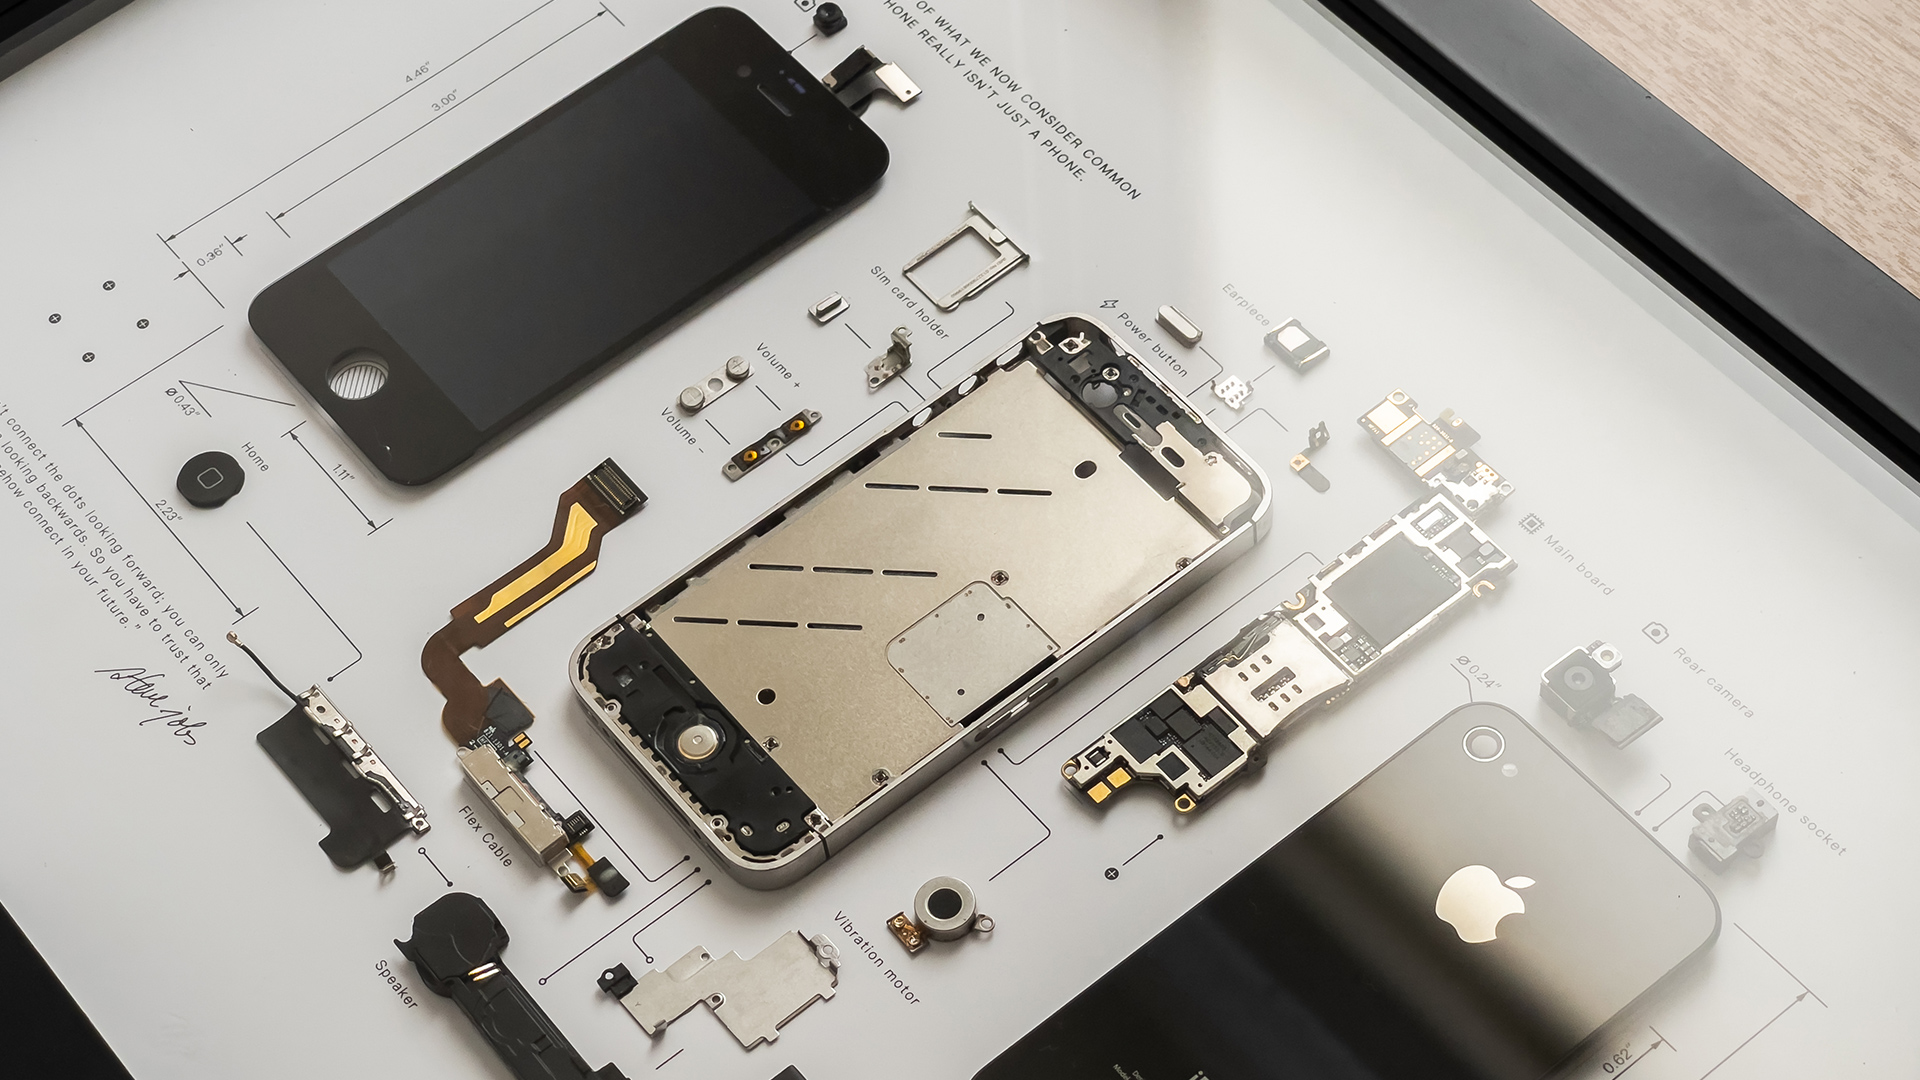 Hands-on: GRID 4S turns a disassembled iPhone into decor for your 